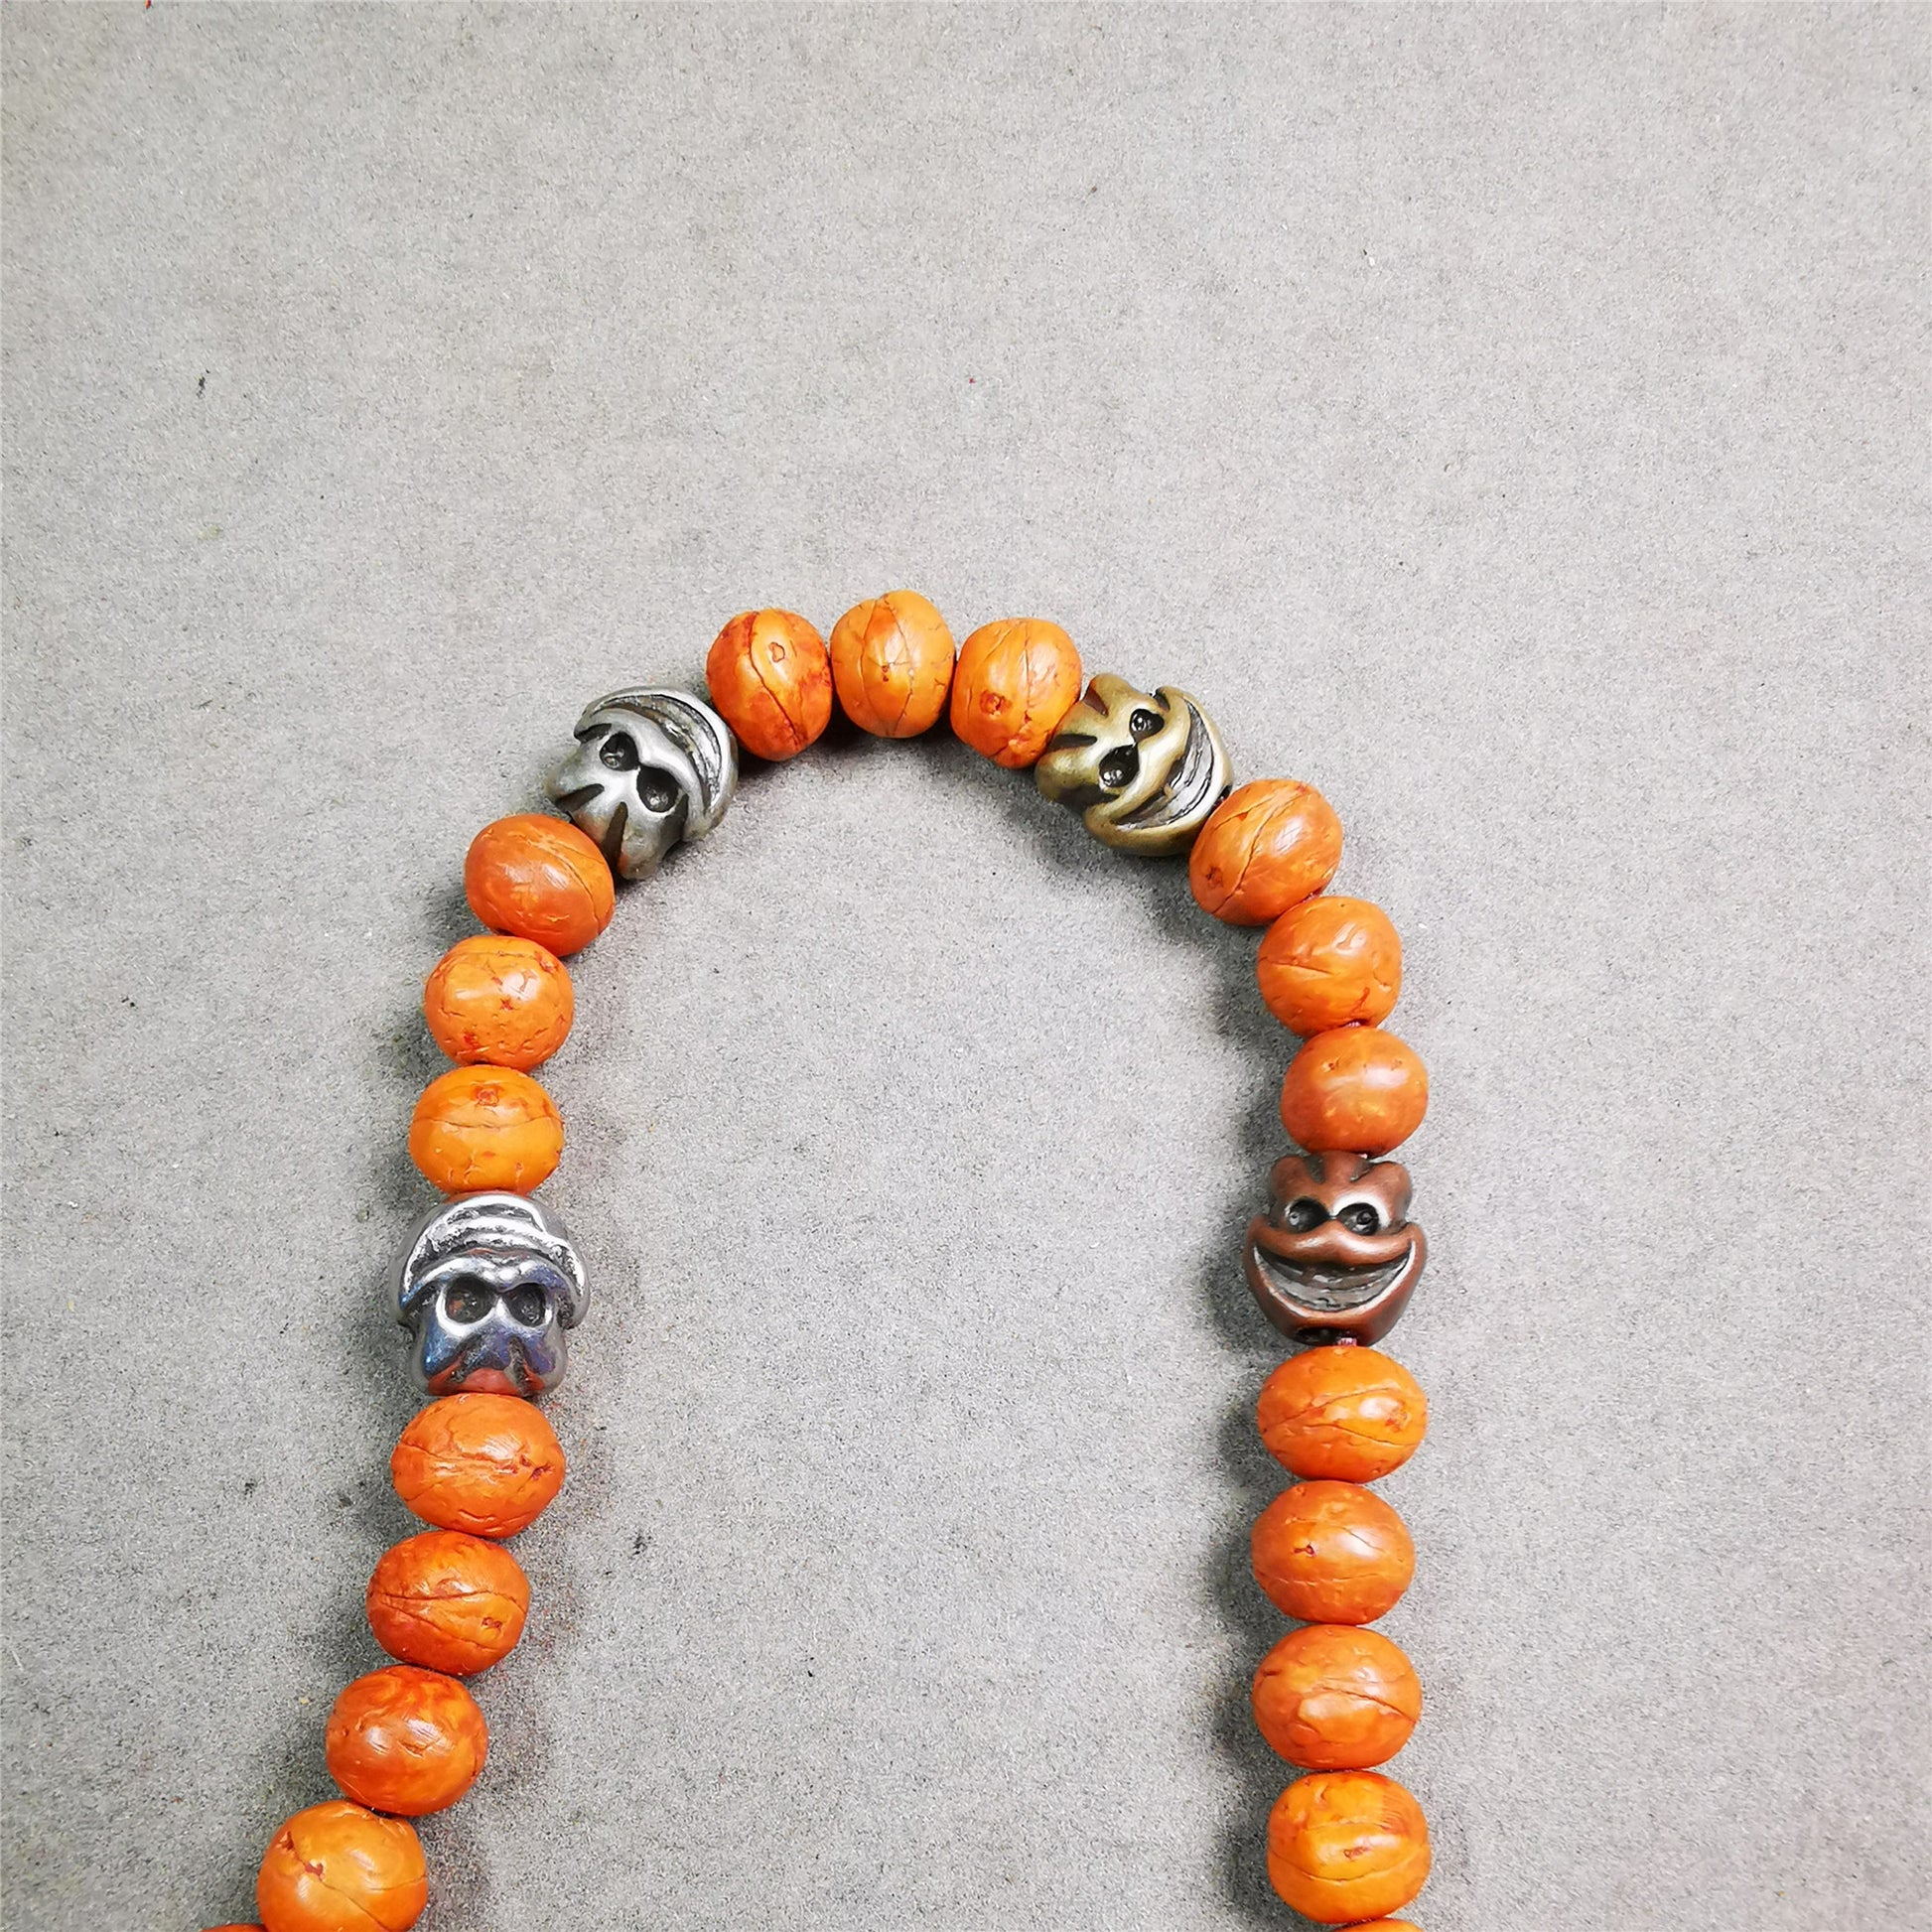 These skull shape spacer beads are made by Tibetan craftsmen and come from Hepo Town, Baiyu County, the birthplace of the famous Tibetan handicrafts. You can use it as a spacer bead on mala,or pendant bead under guru bead.